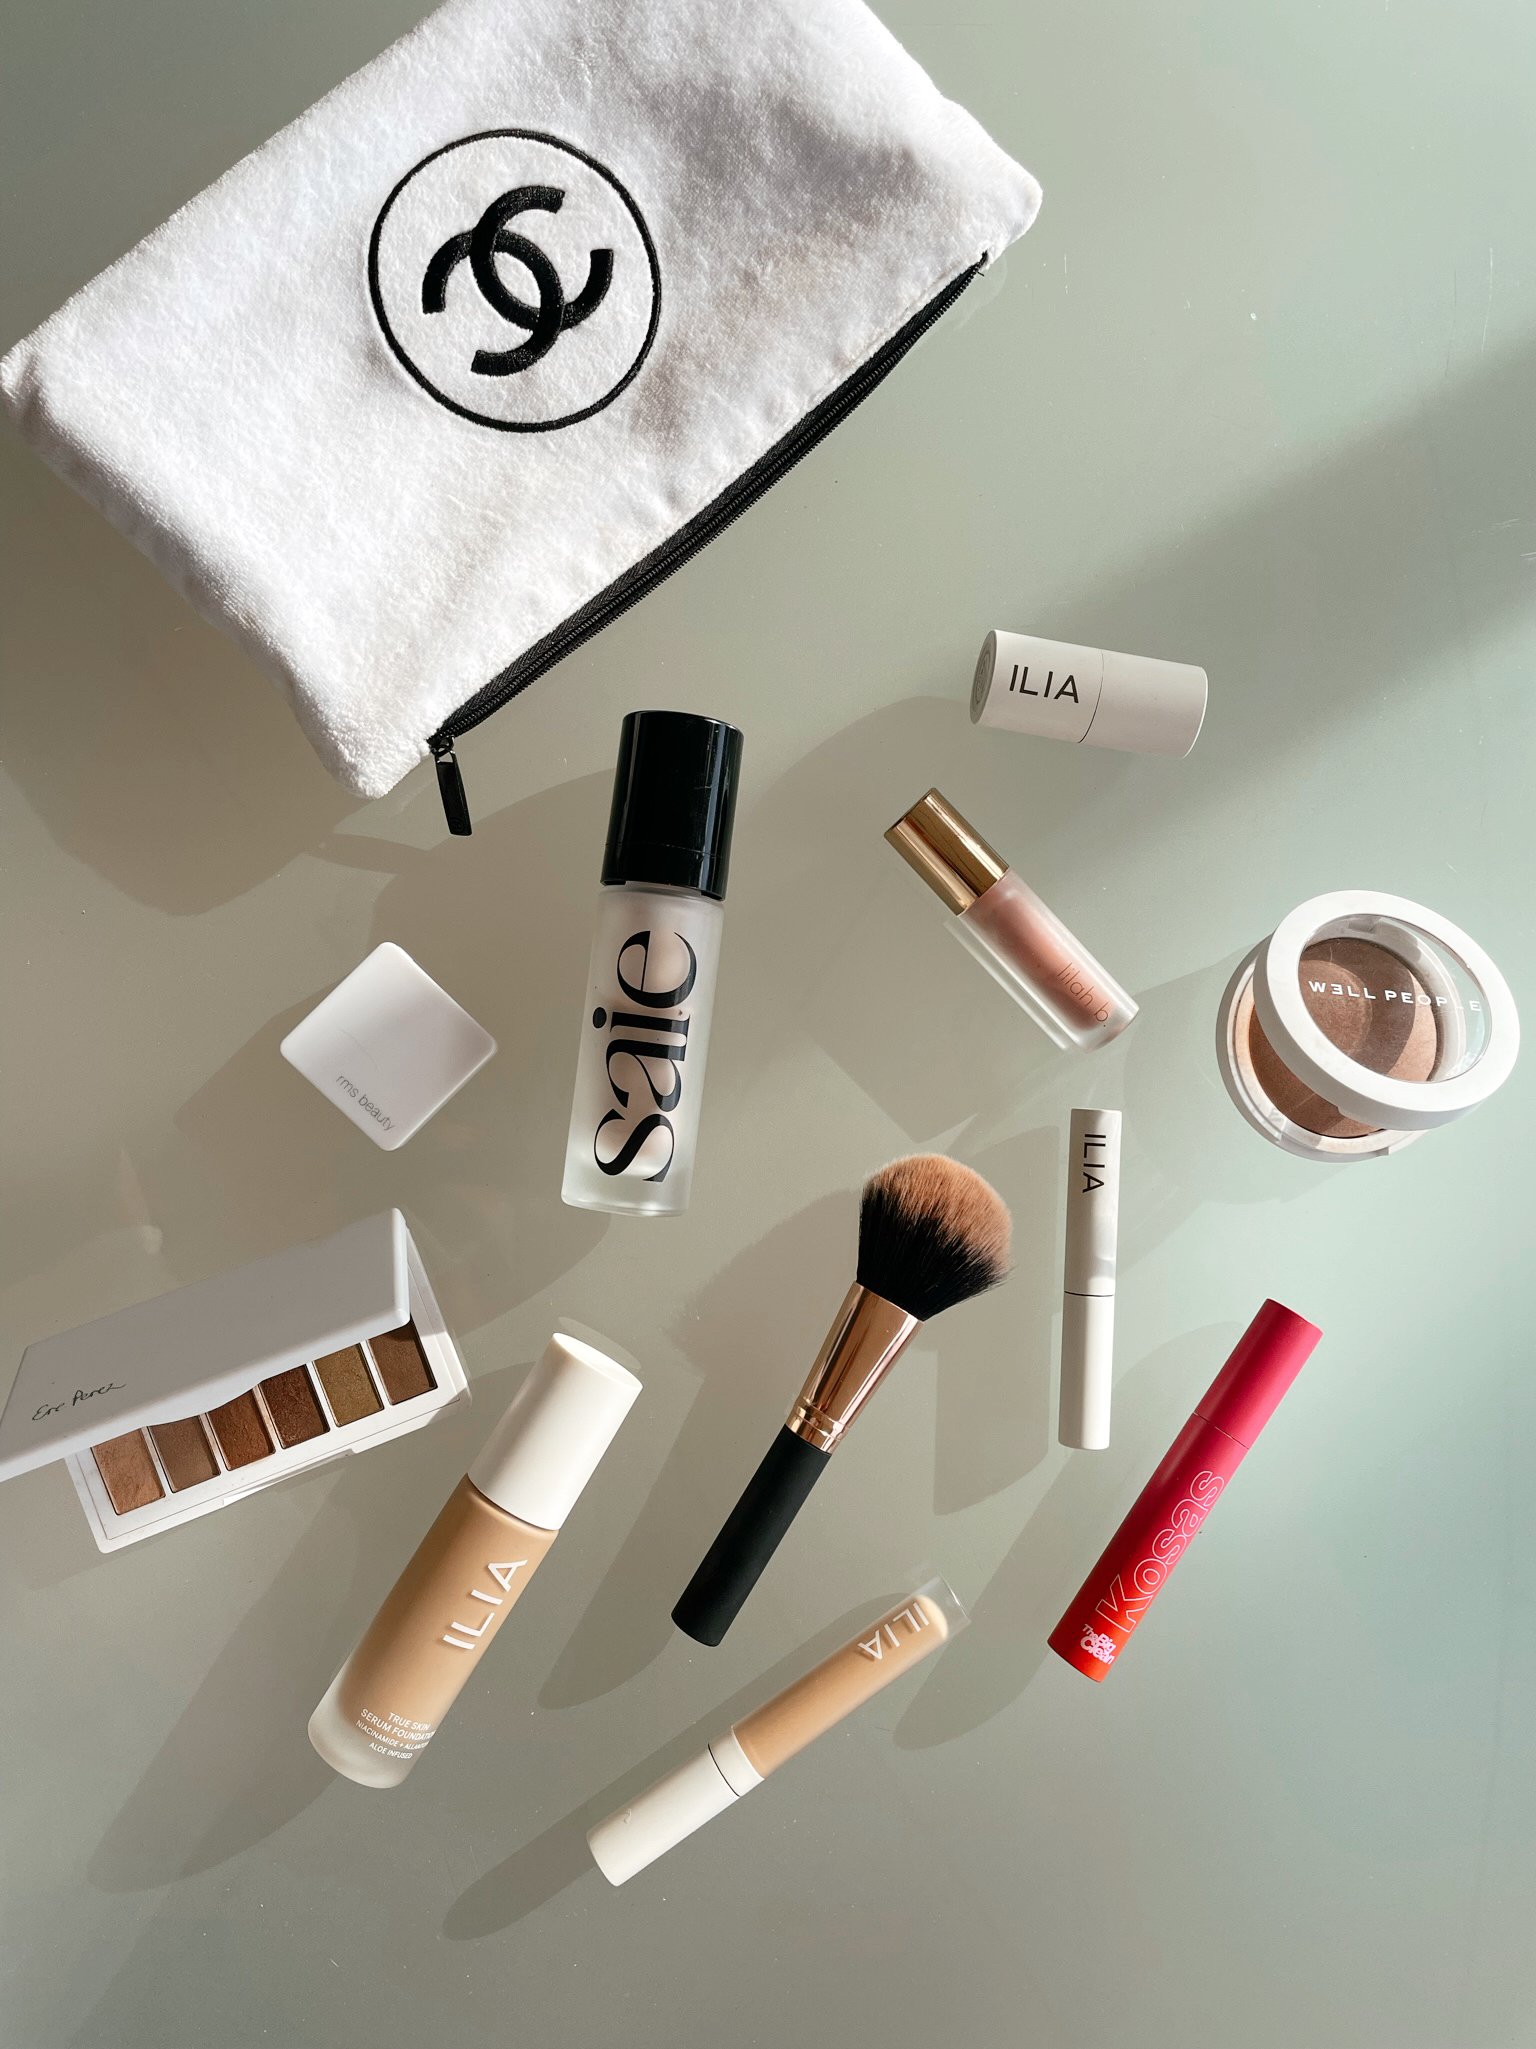 Use This Not That: 10 Beauty Dupes to Replace Your Toxic Makeup — The Glow  Girl by Melissa Meyers